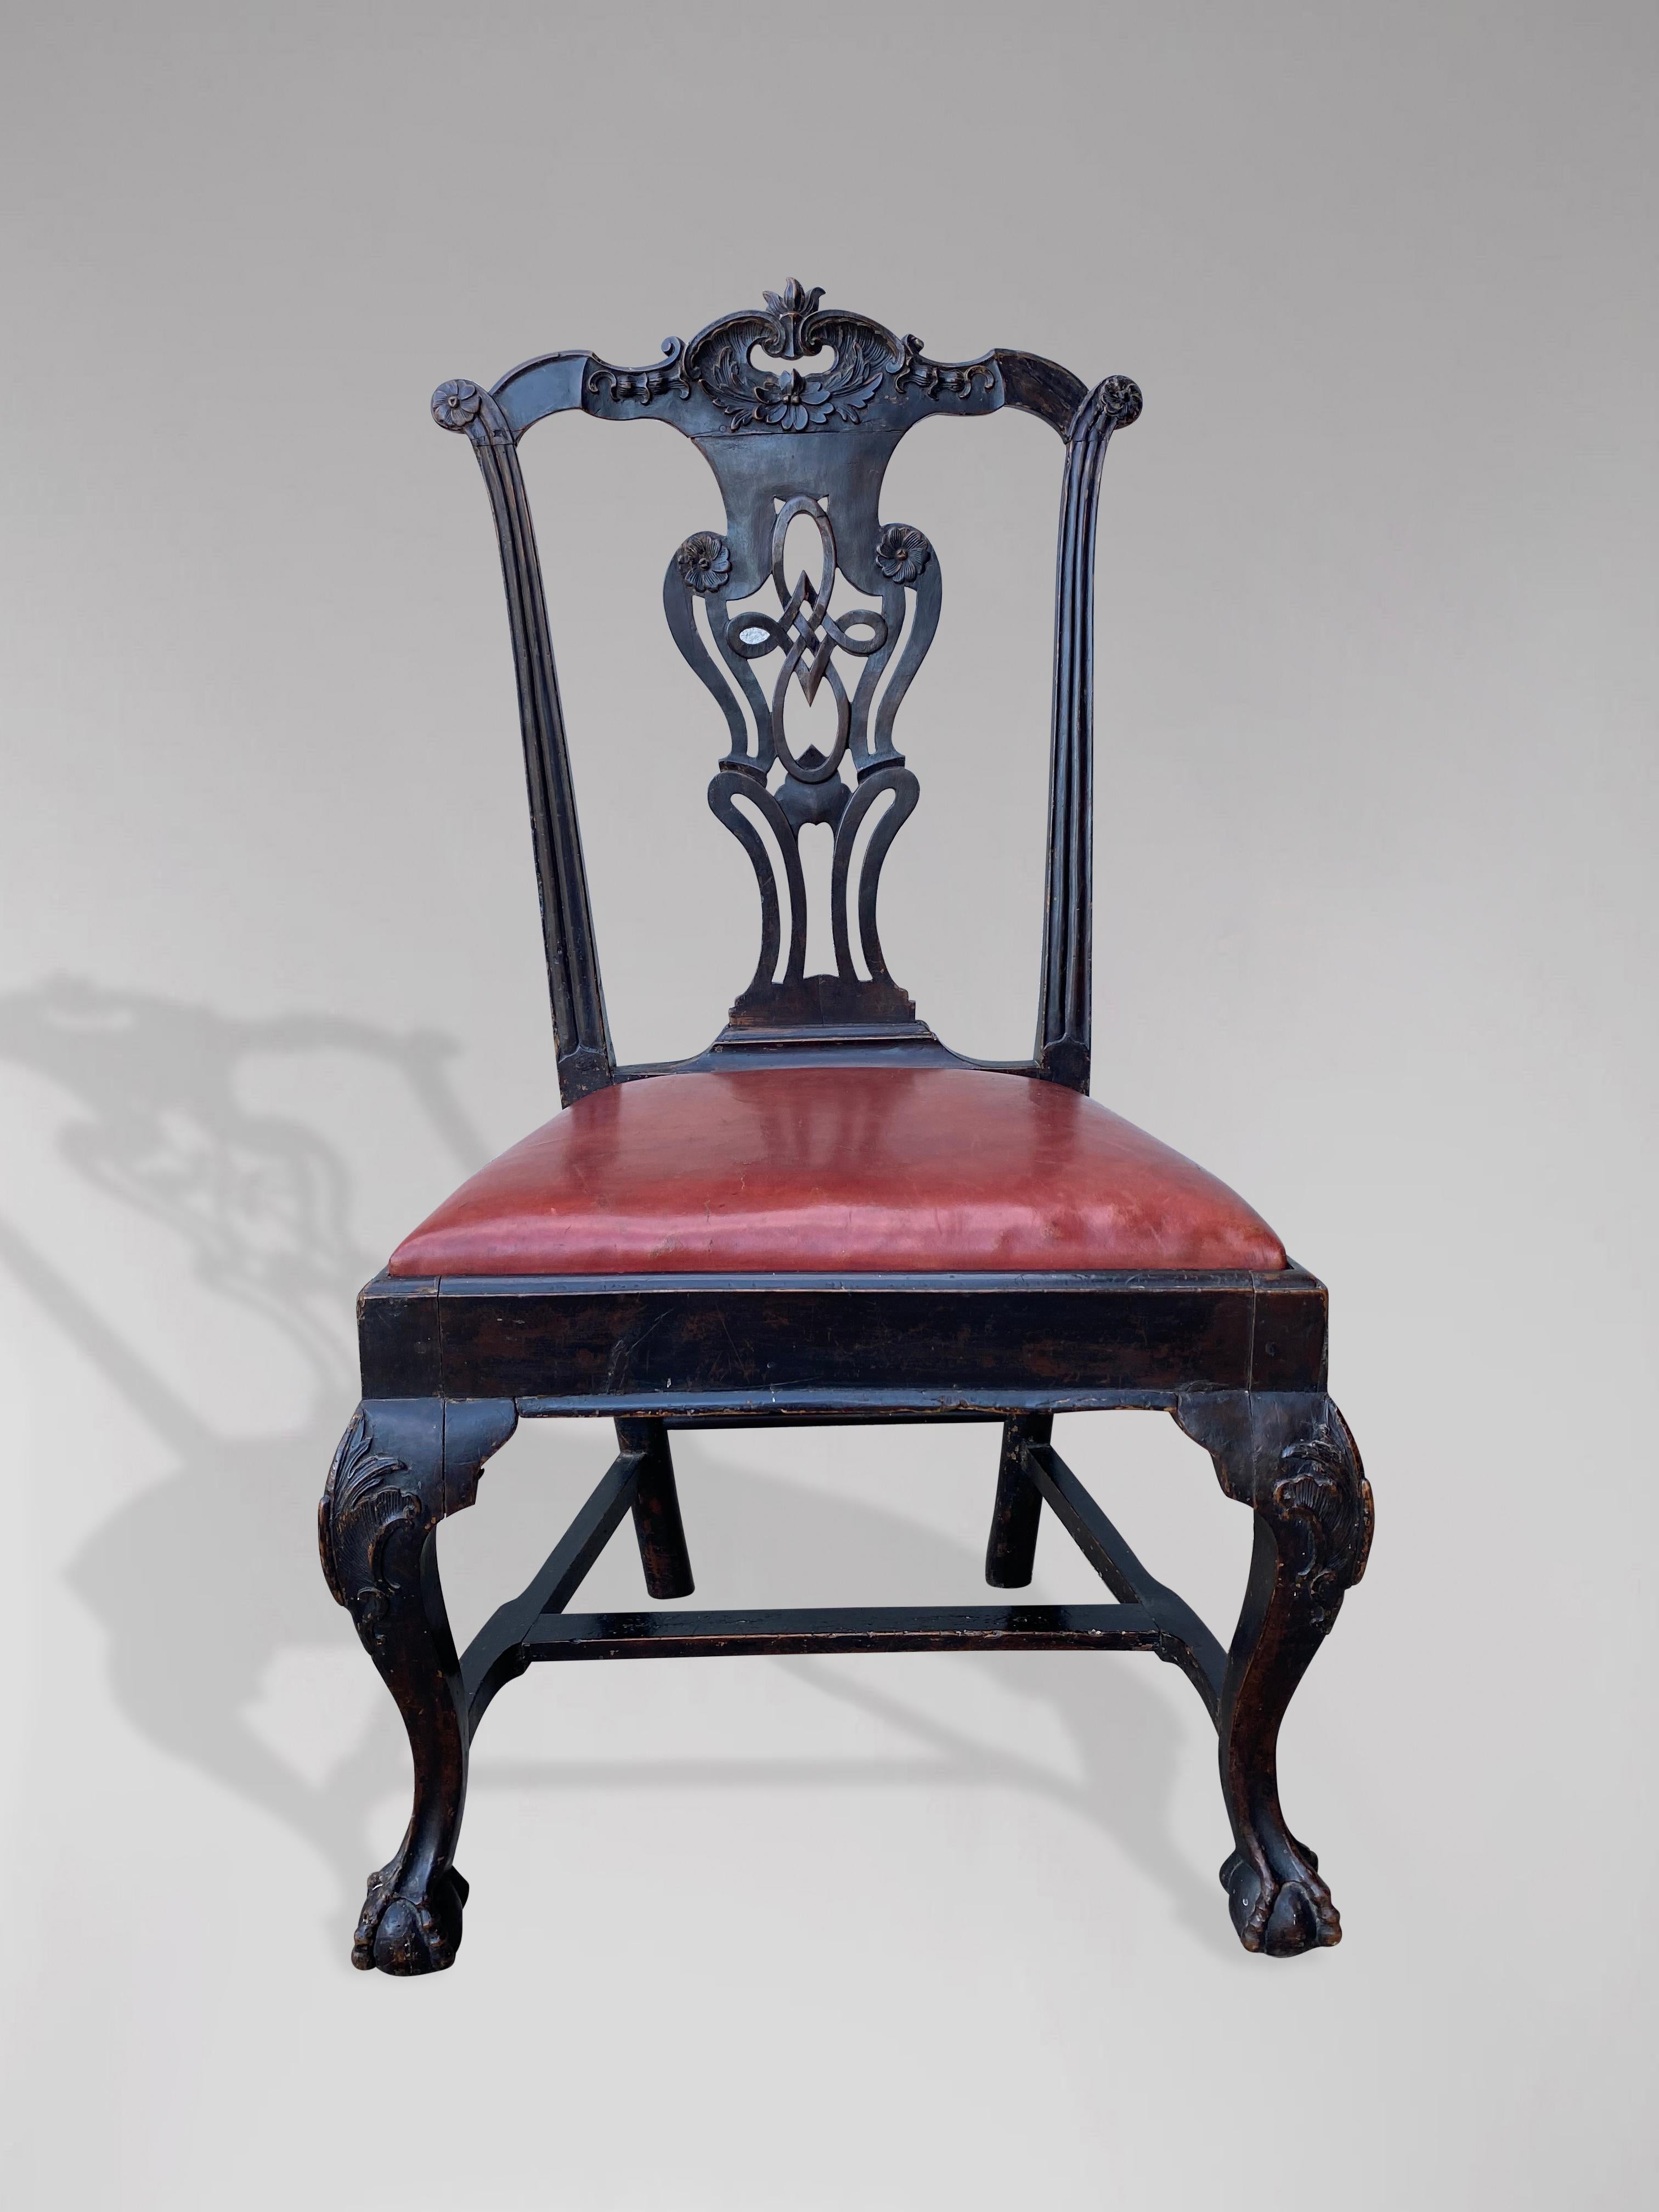 An early 20th century, Edwardian period painted and carved in the Chippendale manner single chair. Featuring serpentine crest rail and pierced back splat with carved ornamentation. The chair with original paint and has a cushioned drop in seat